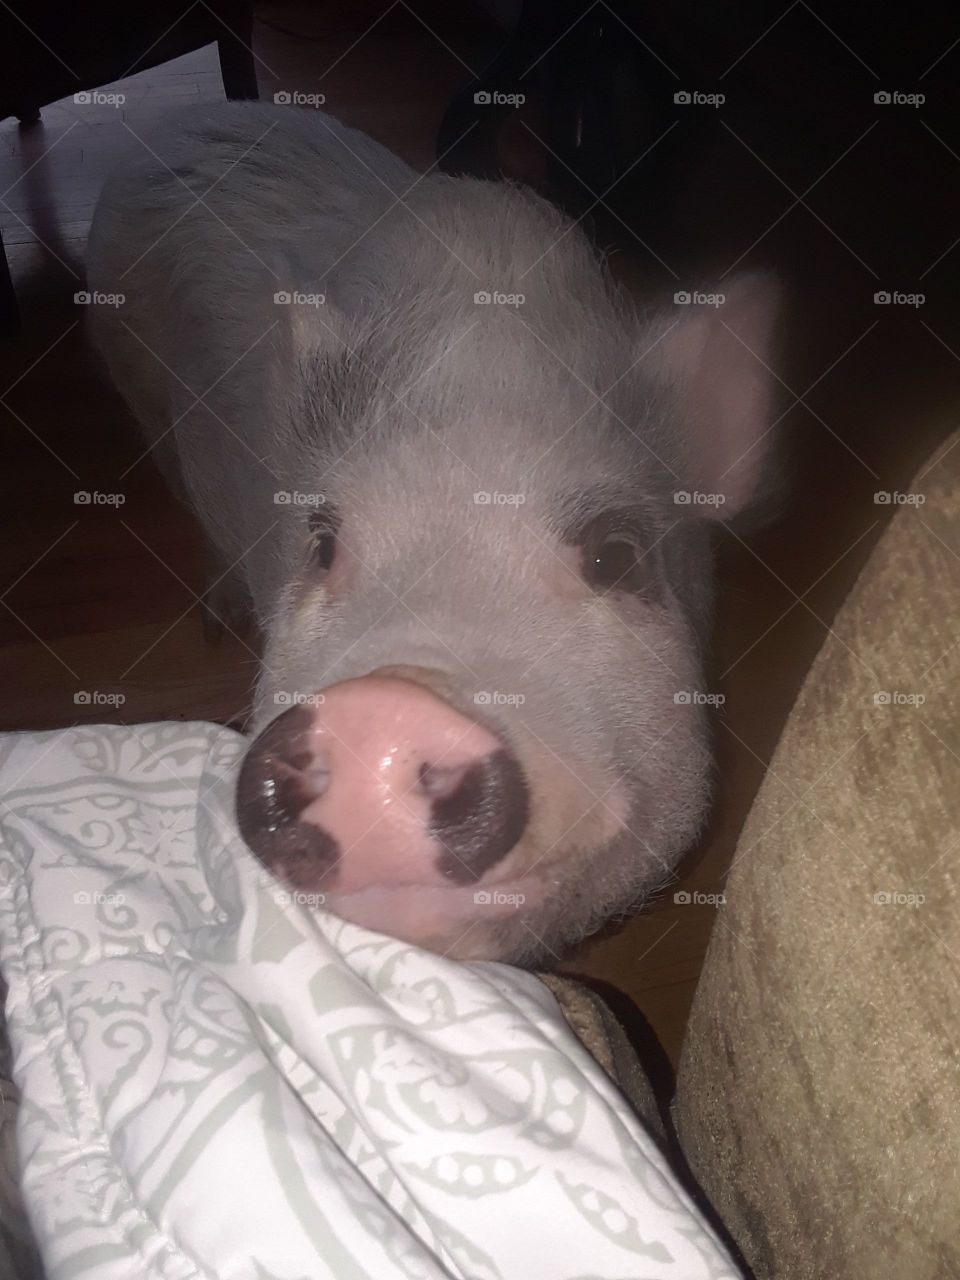 Pot belly pet pig named Petunia on Thanksgiving day hanging out cute wet pig snout, nose, with spots